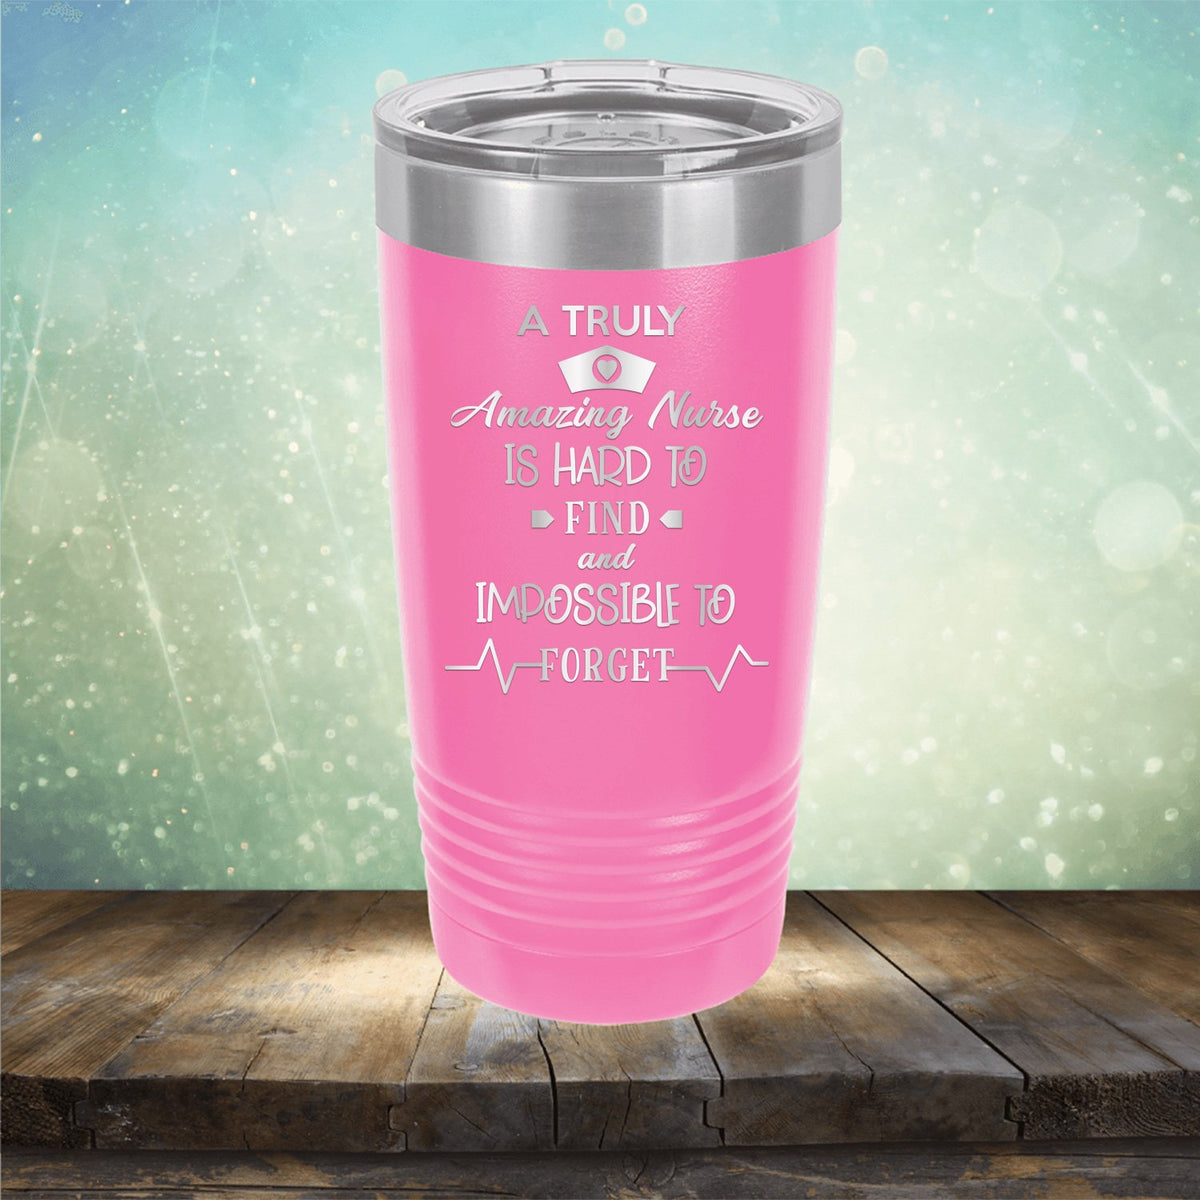 A Truly Amazing Nurse is Hard to Find and Impossible to Forget - Laser Etched Tumbler Mug